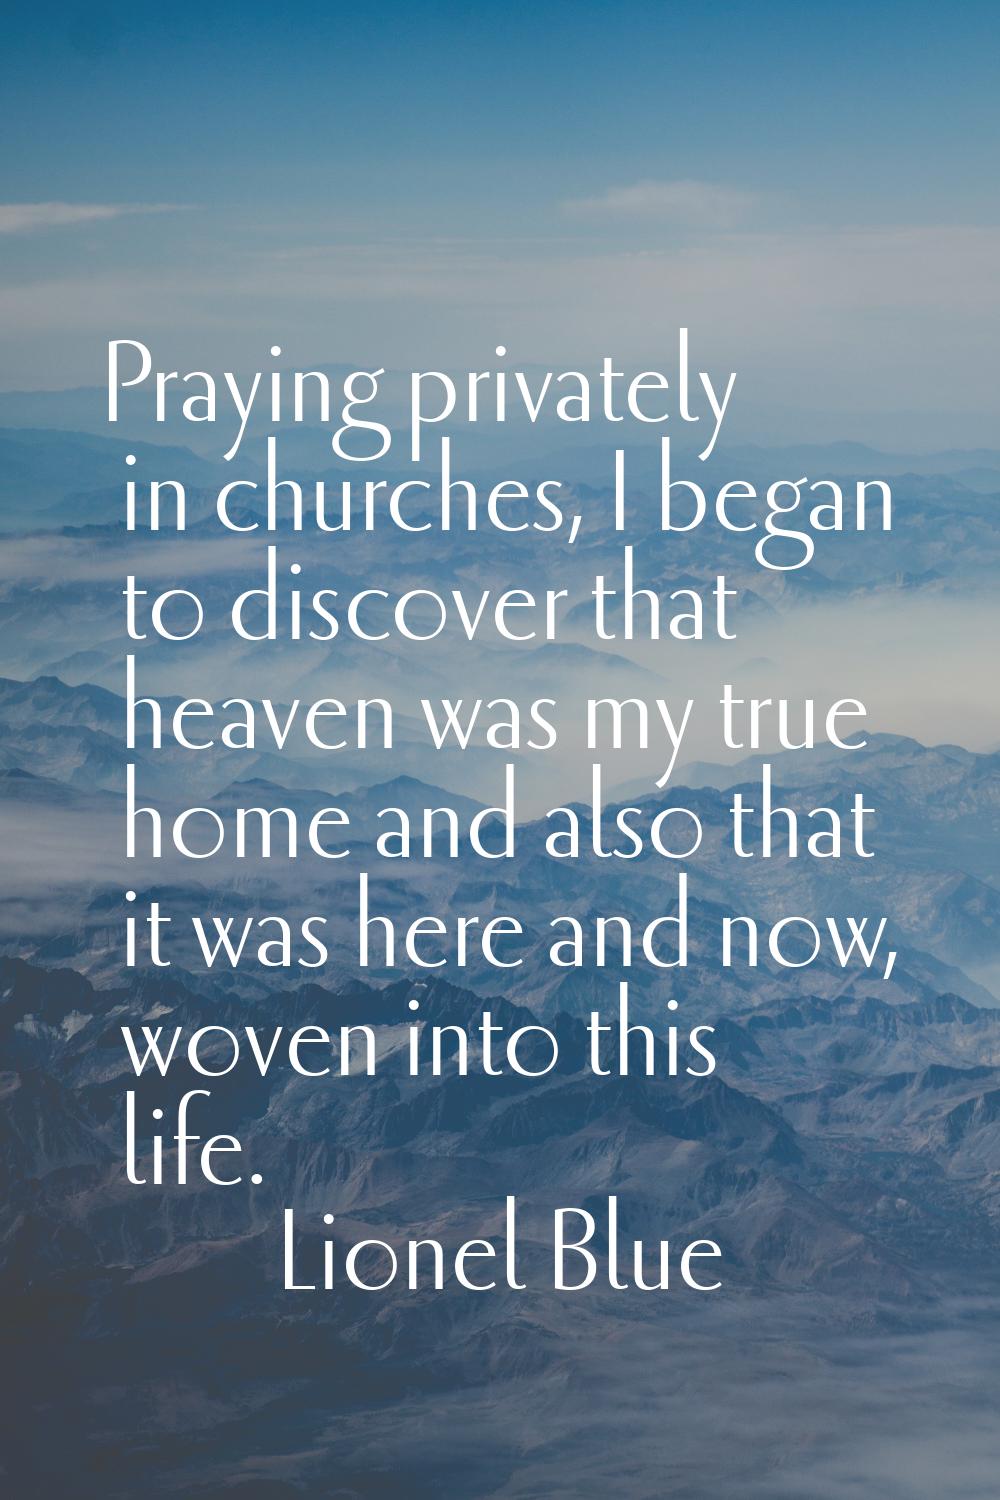 Praying privately in churches, I began to discover that heaven was my true home and also that it wa